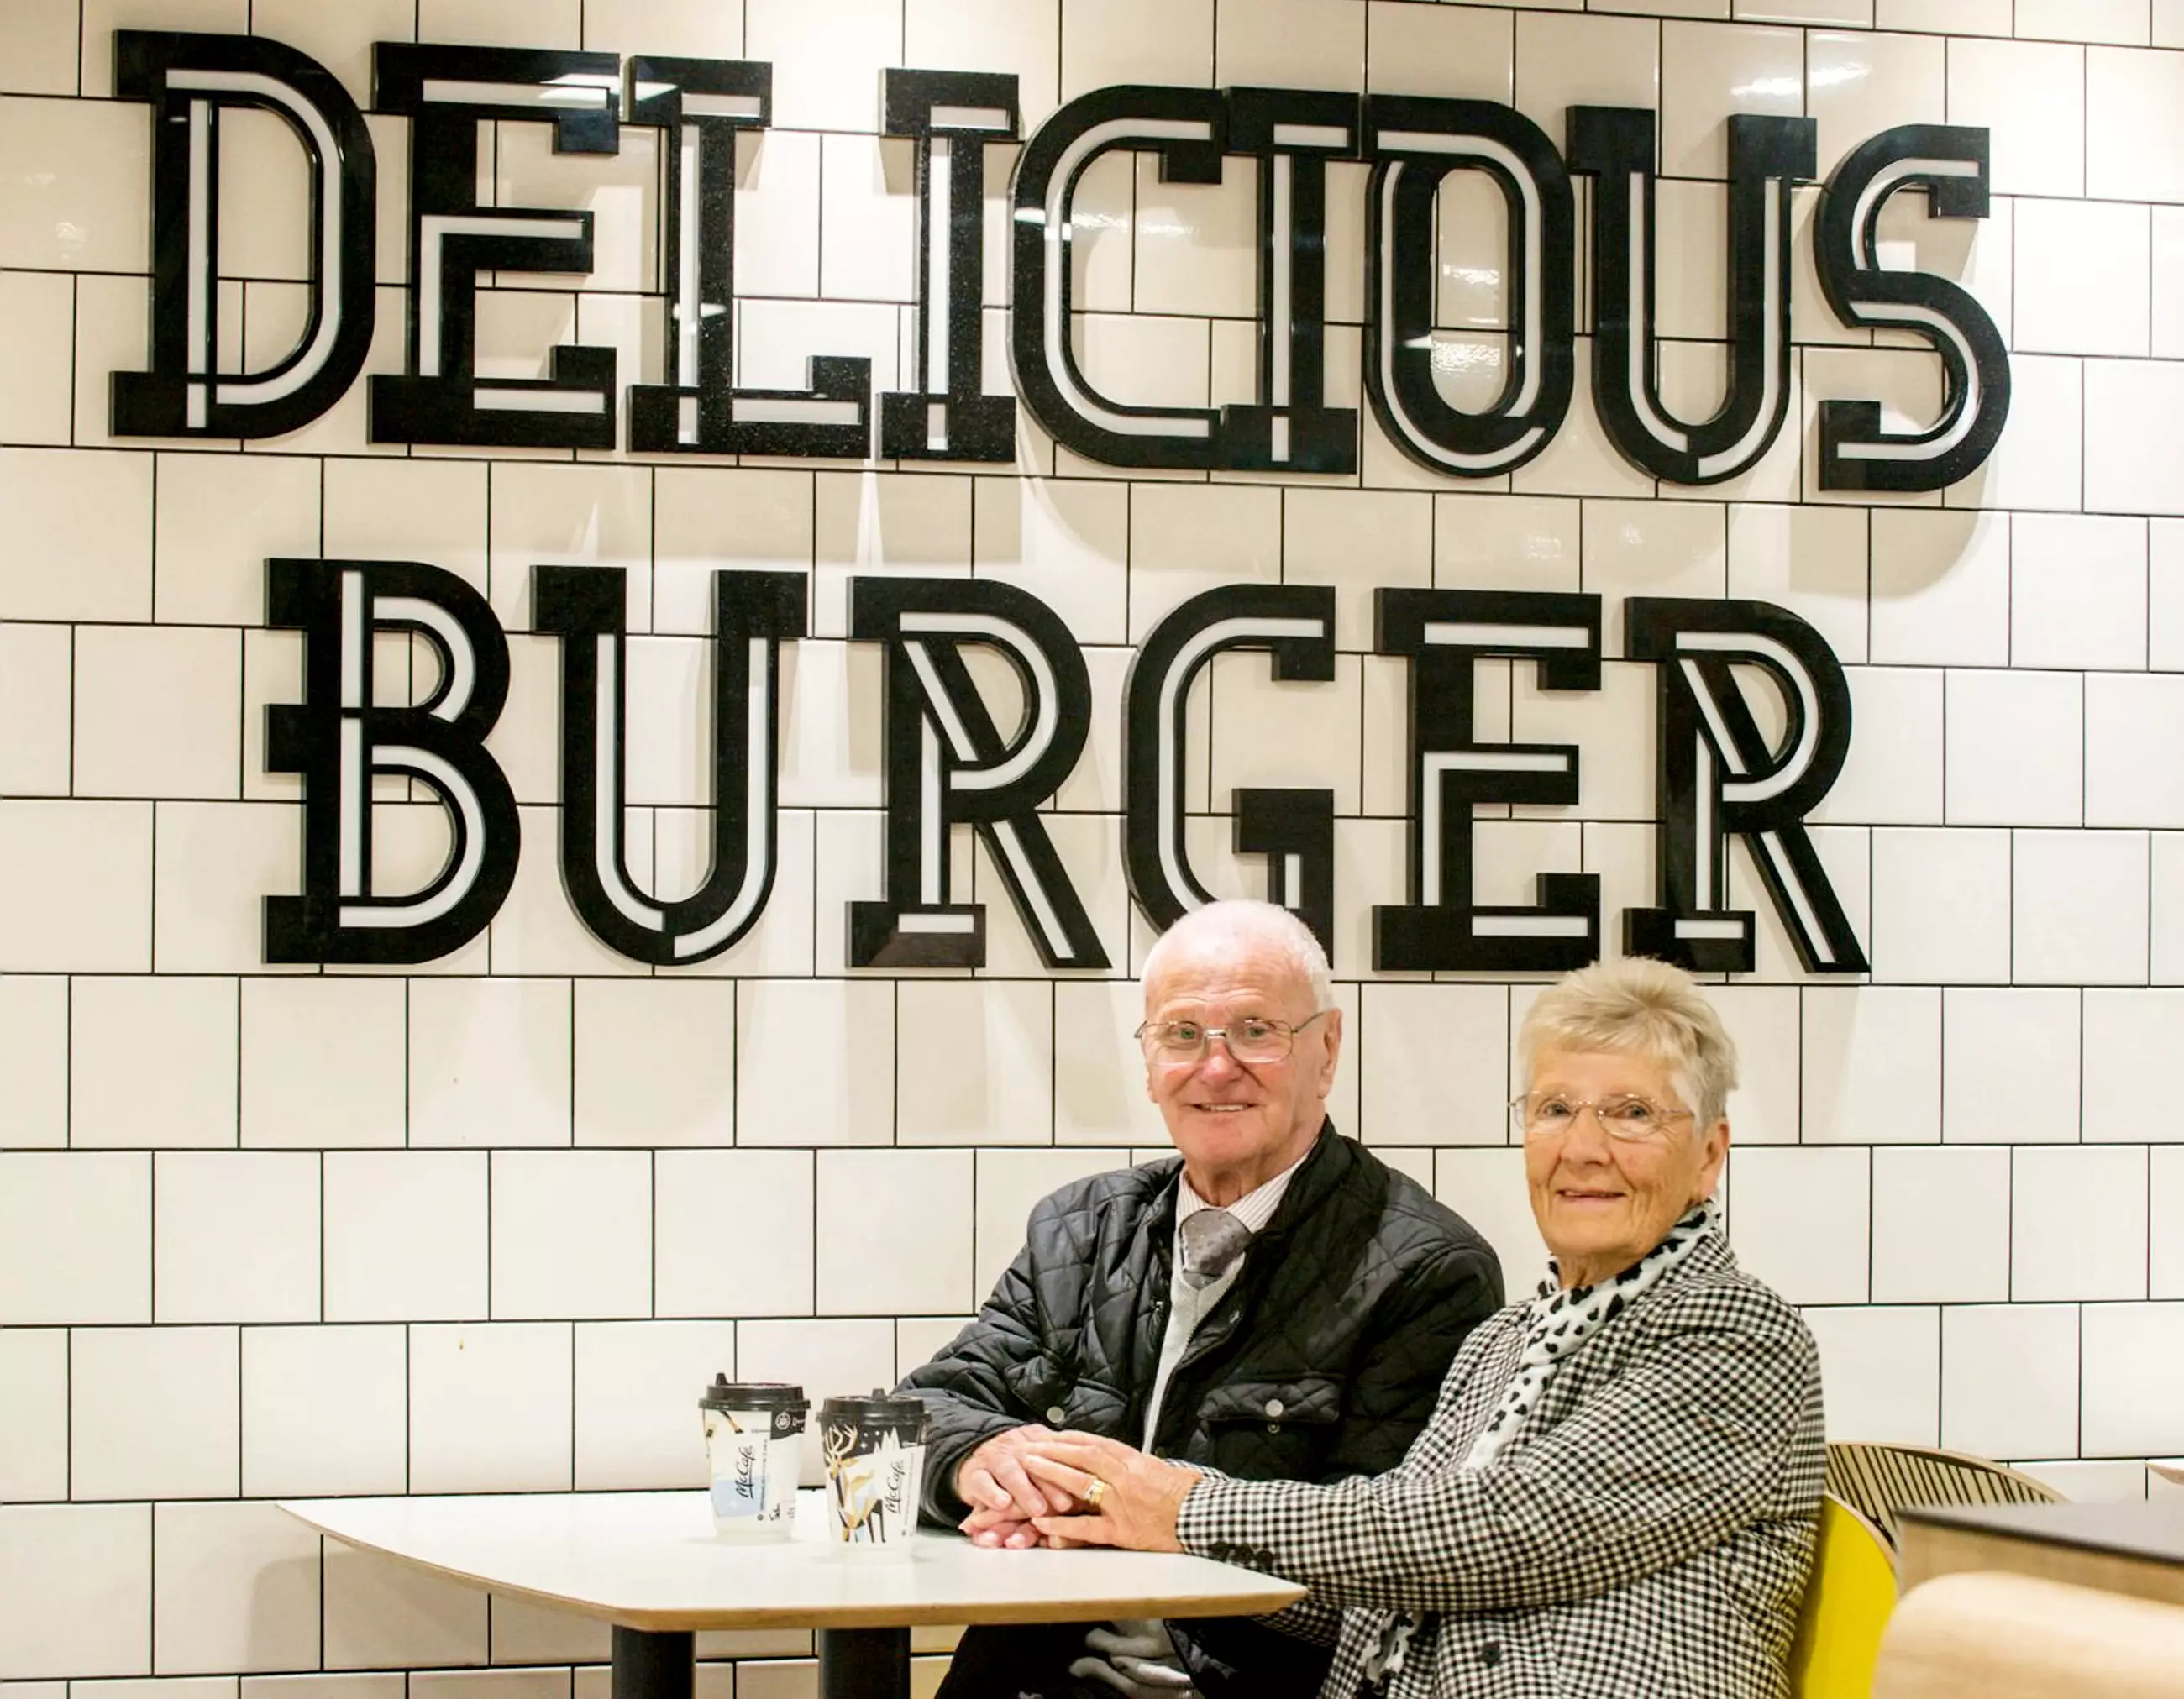 Tom and Pauline Jones visit their local McDonald's every day.